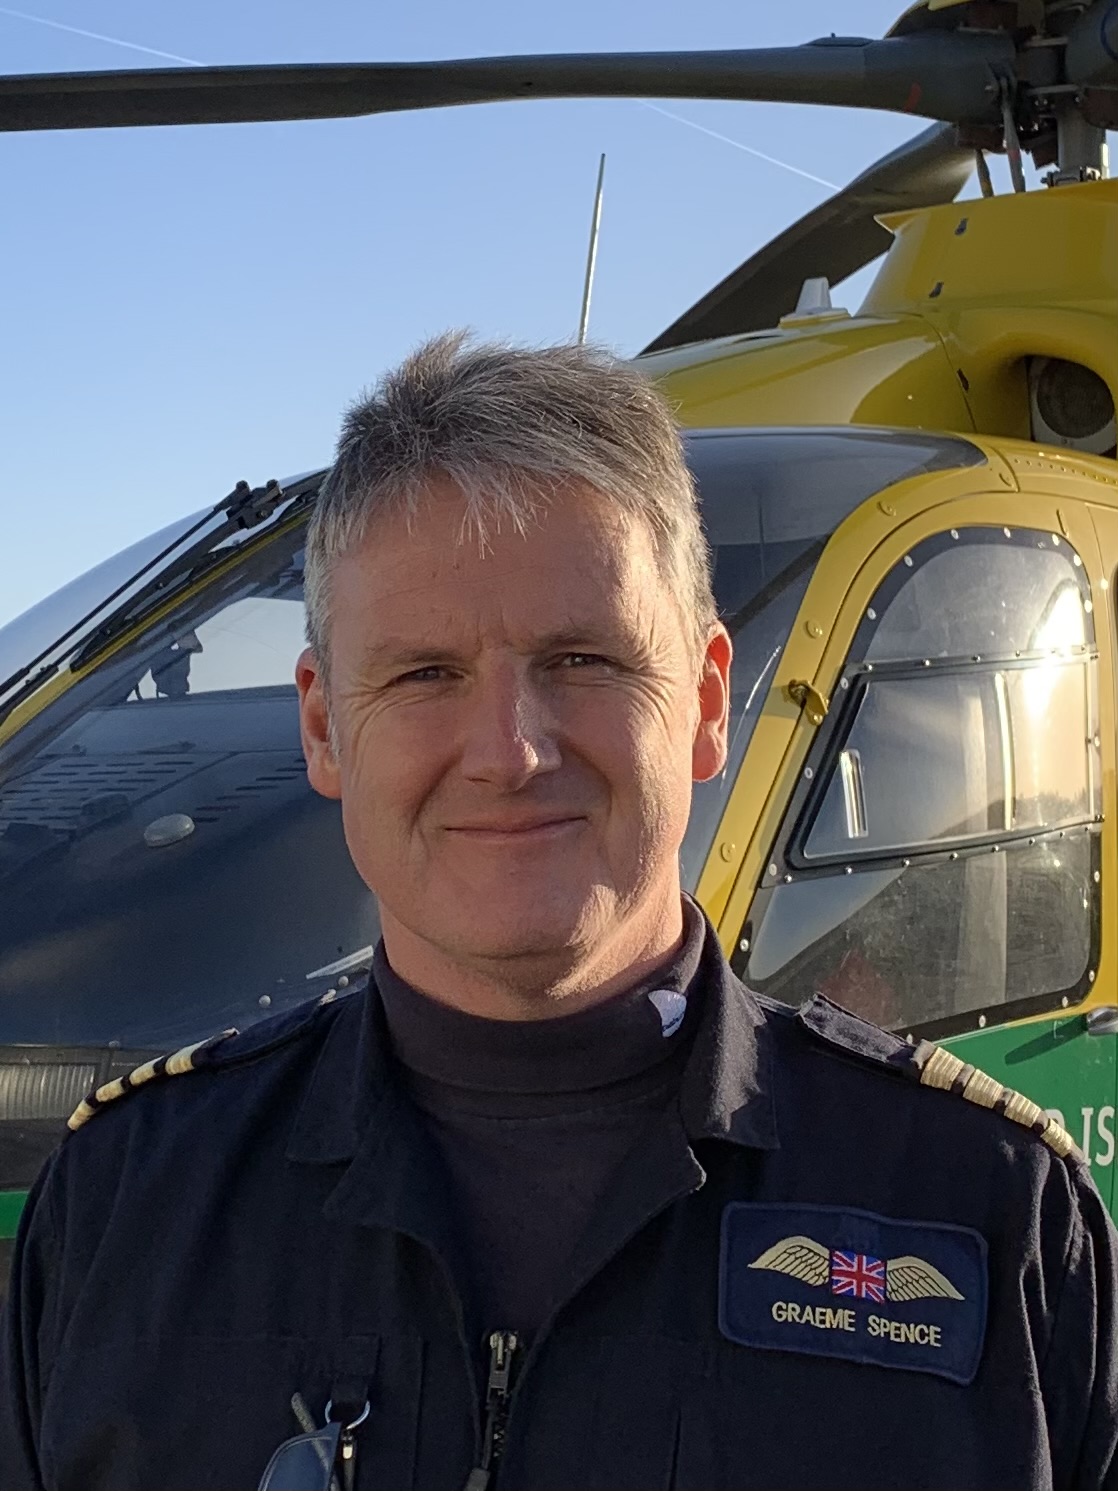 Pilot Graeme Spence stands in front of the helicopter